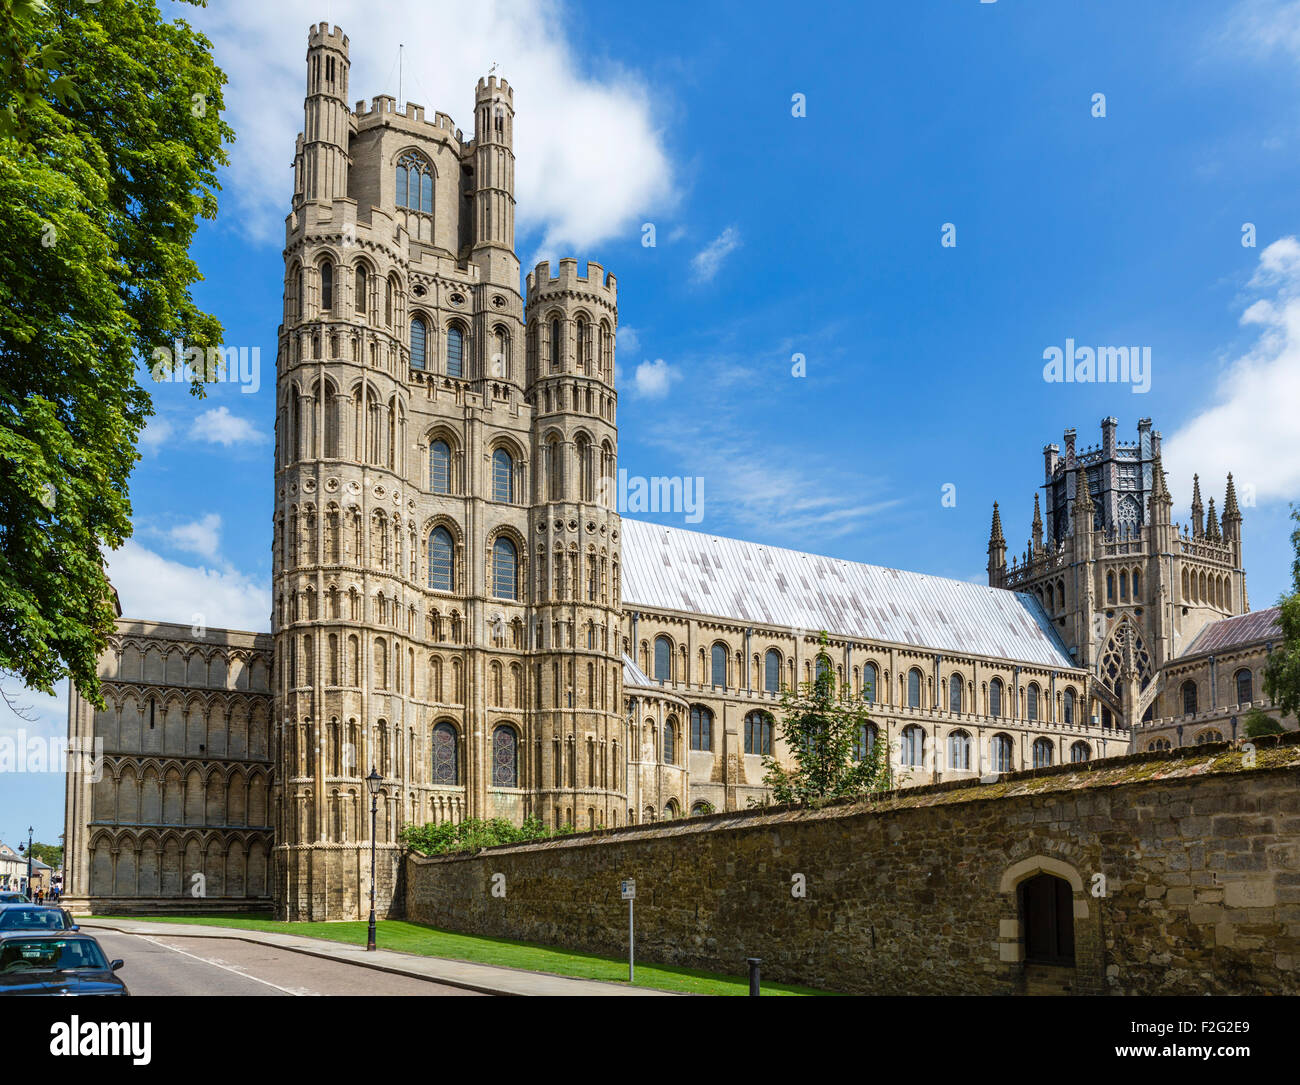 Ely Cathedral from The Gallery, Ely, Cambridgeshire, England, UK Stock Photo